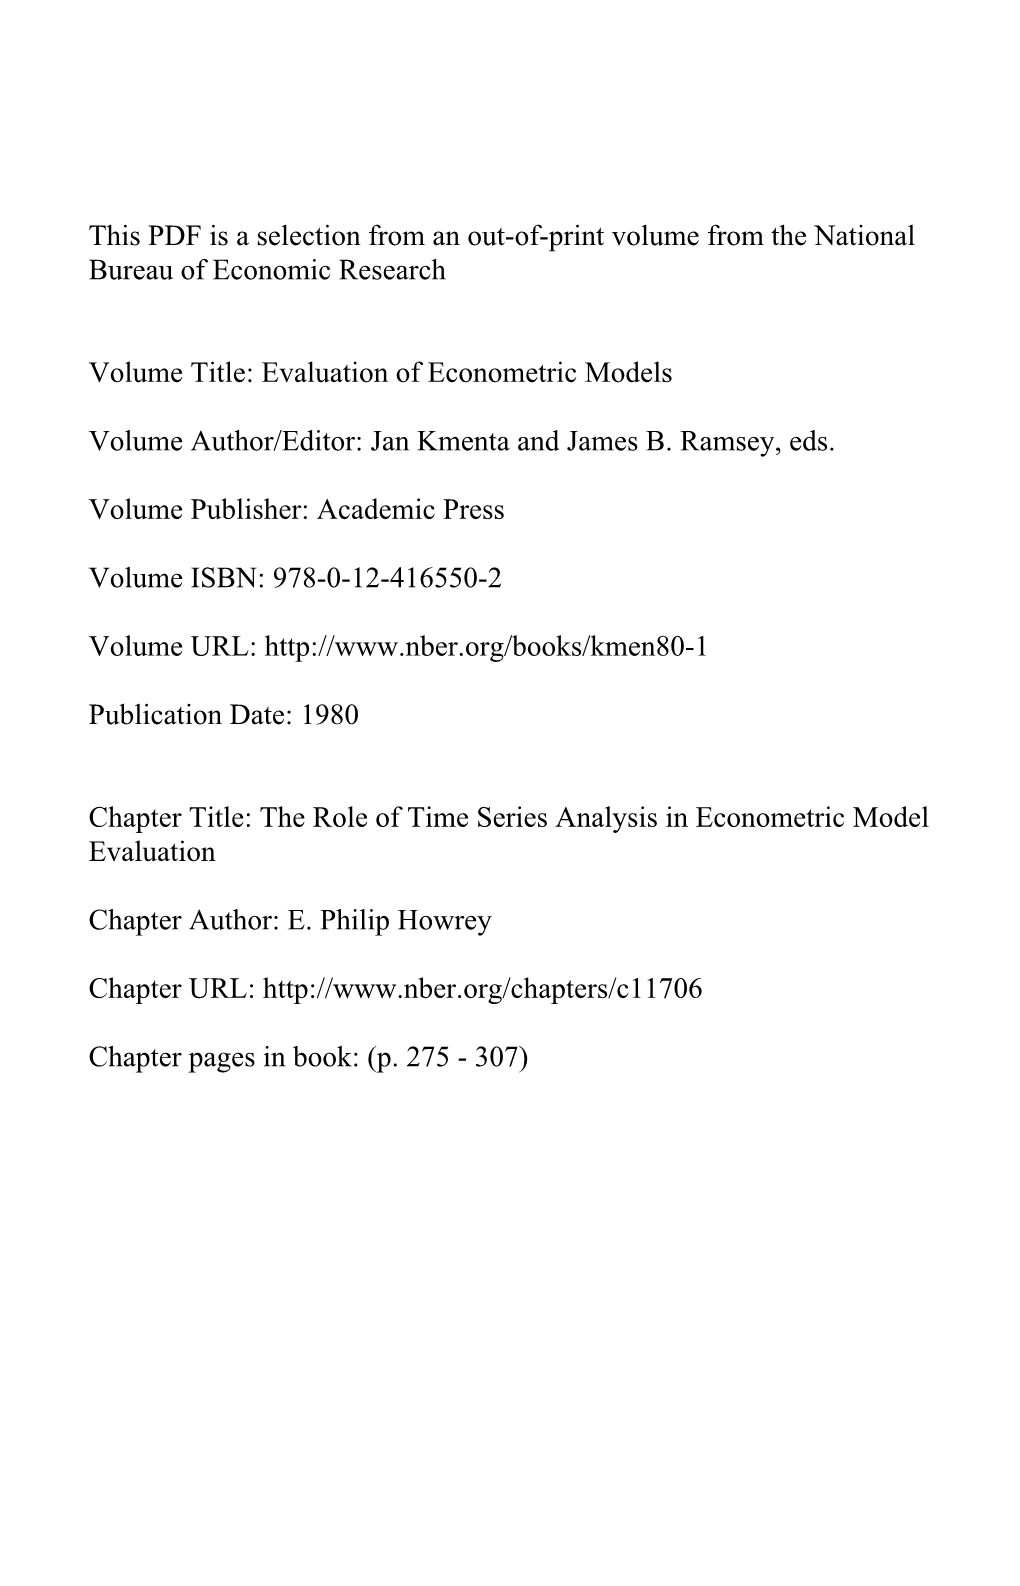 The Role of Time Series Analysis in Econometric Model Evaluation